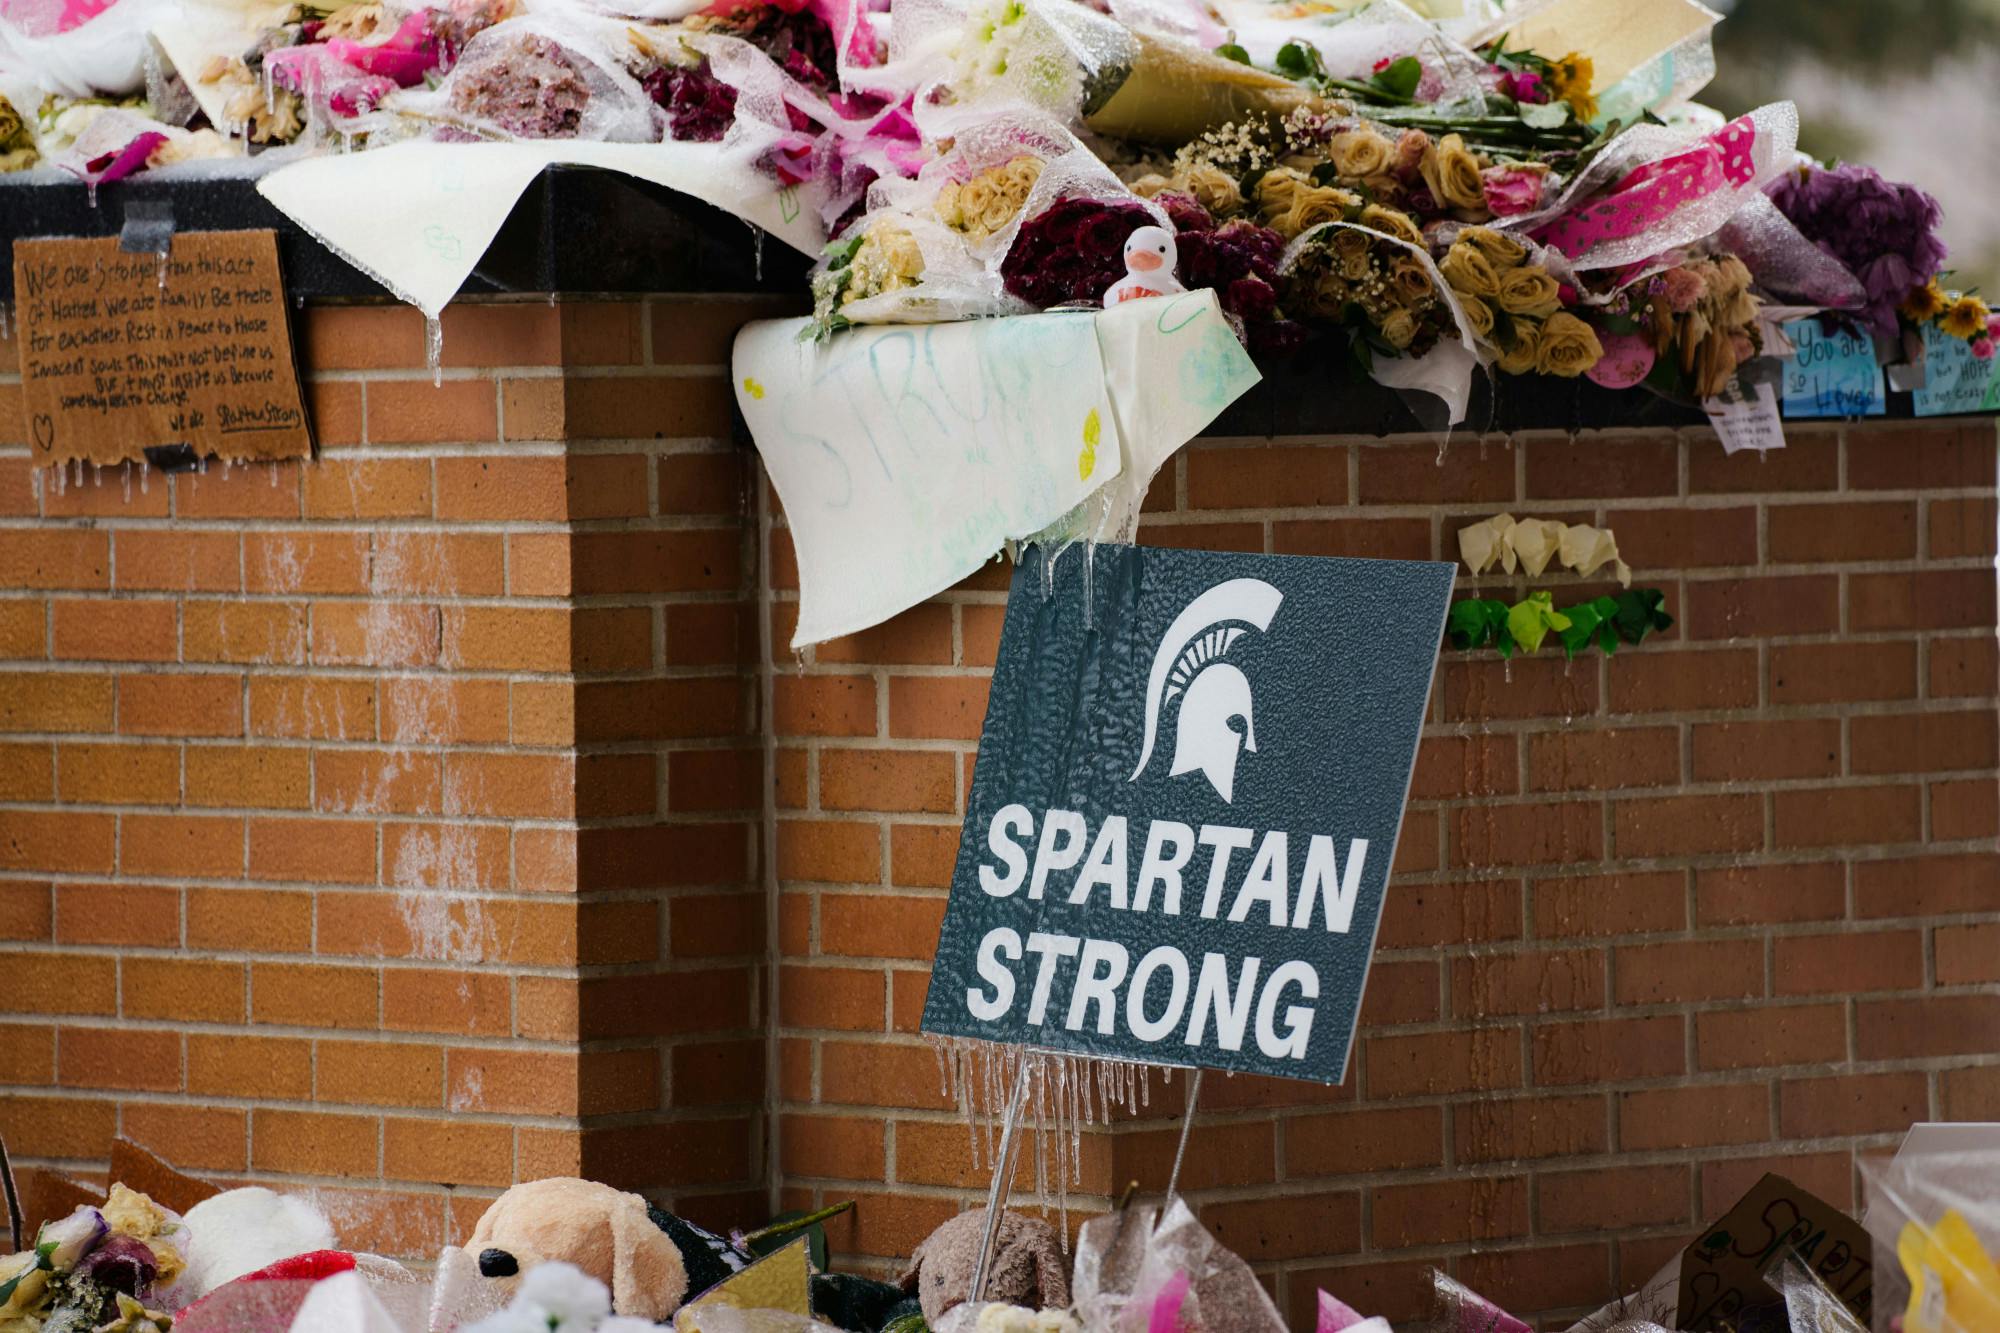 A "Spartan Strong" sign is iced over after a winter storm came through the Michigan State University campus on Feb. 23, 2023. The sign is part of a memorial to students affected by a mass shooting that took place on Feb. 13, 2023.